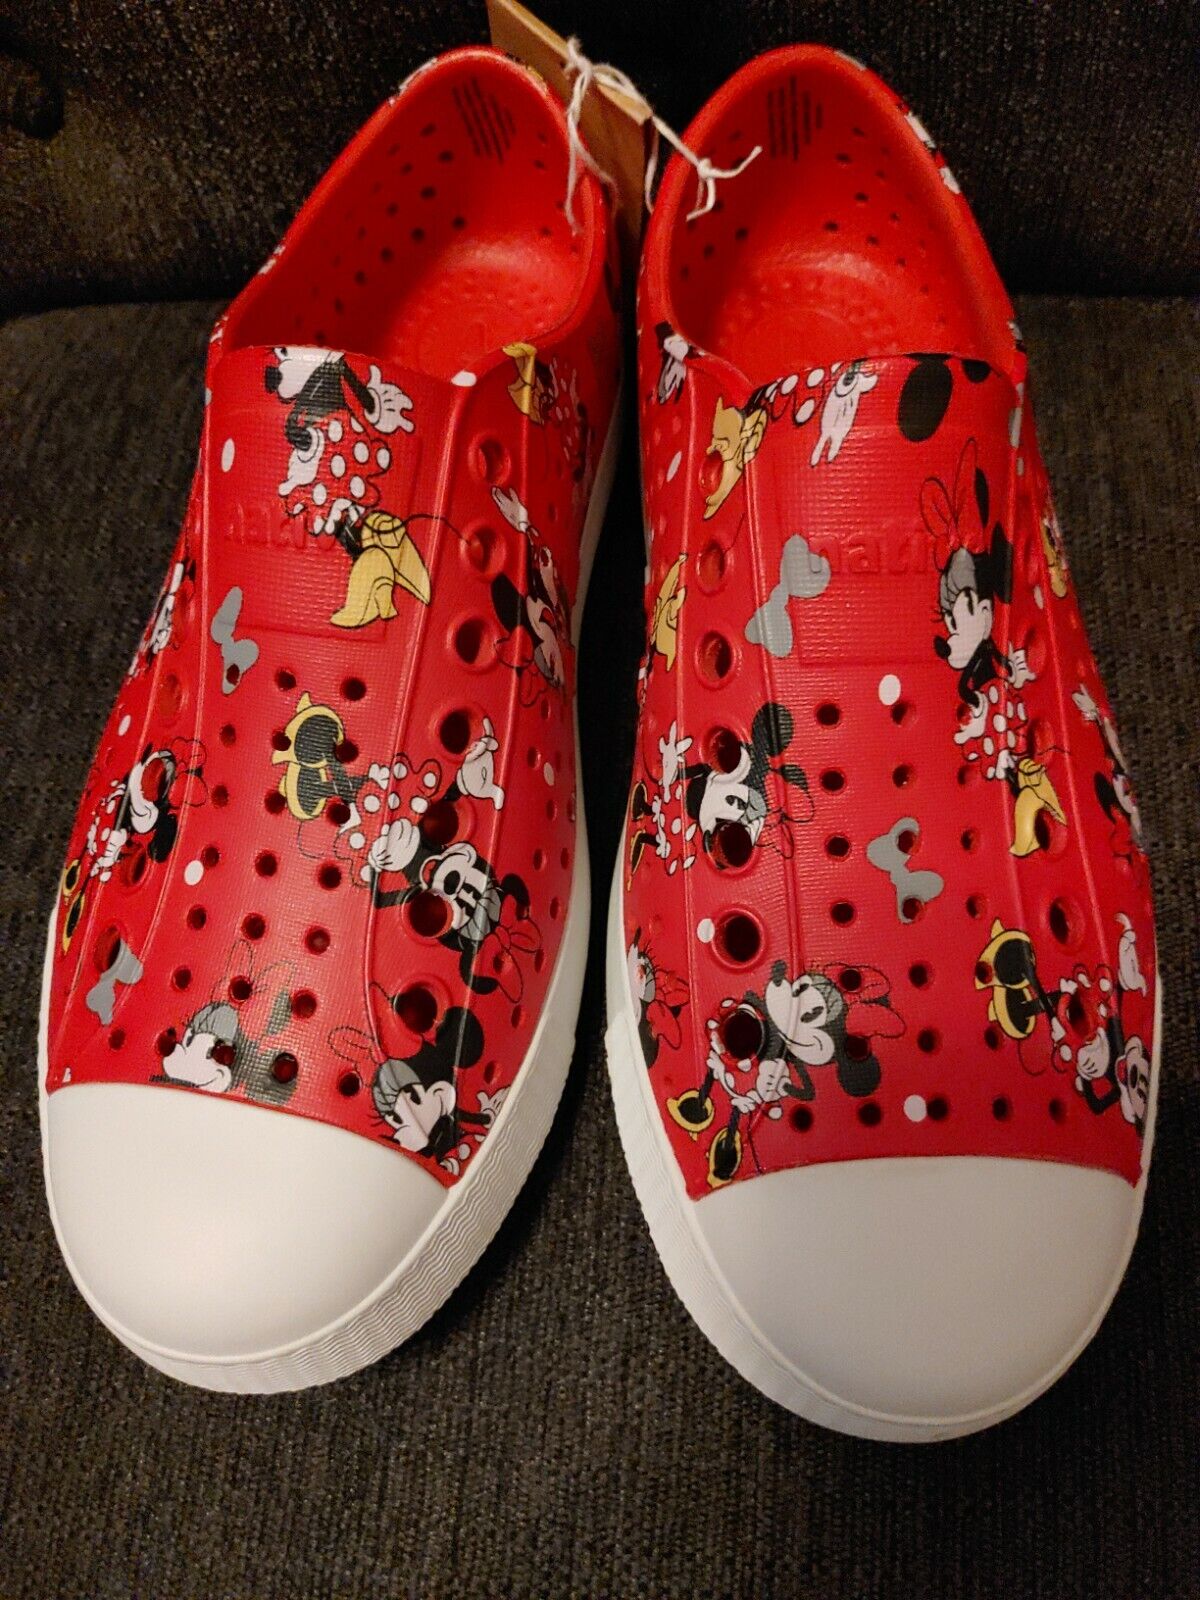 NEW 2021 DISNEY PARKS X NATIVE MINNIE MOUSE RED SLIP-ON SLIDES SHOES JEFFERSON 5